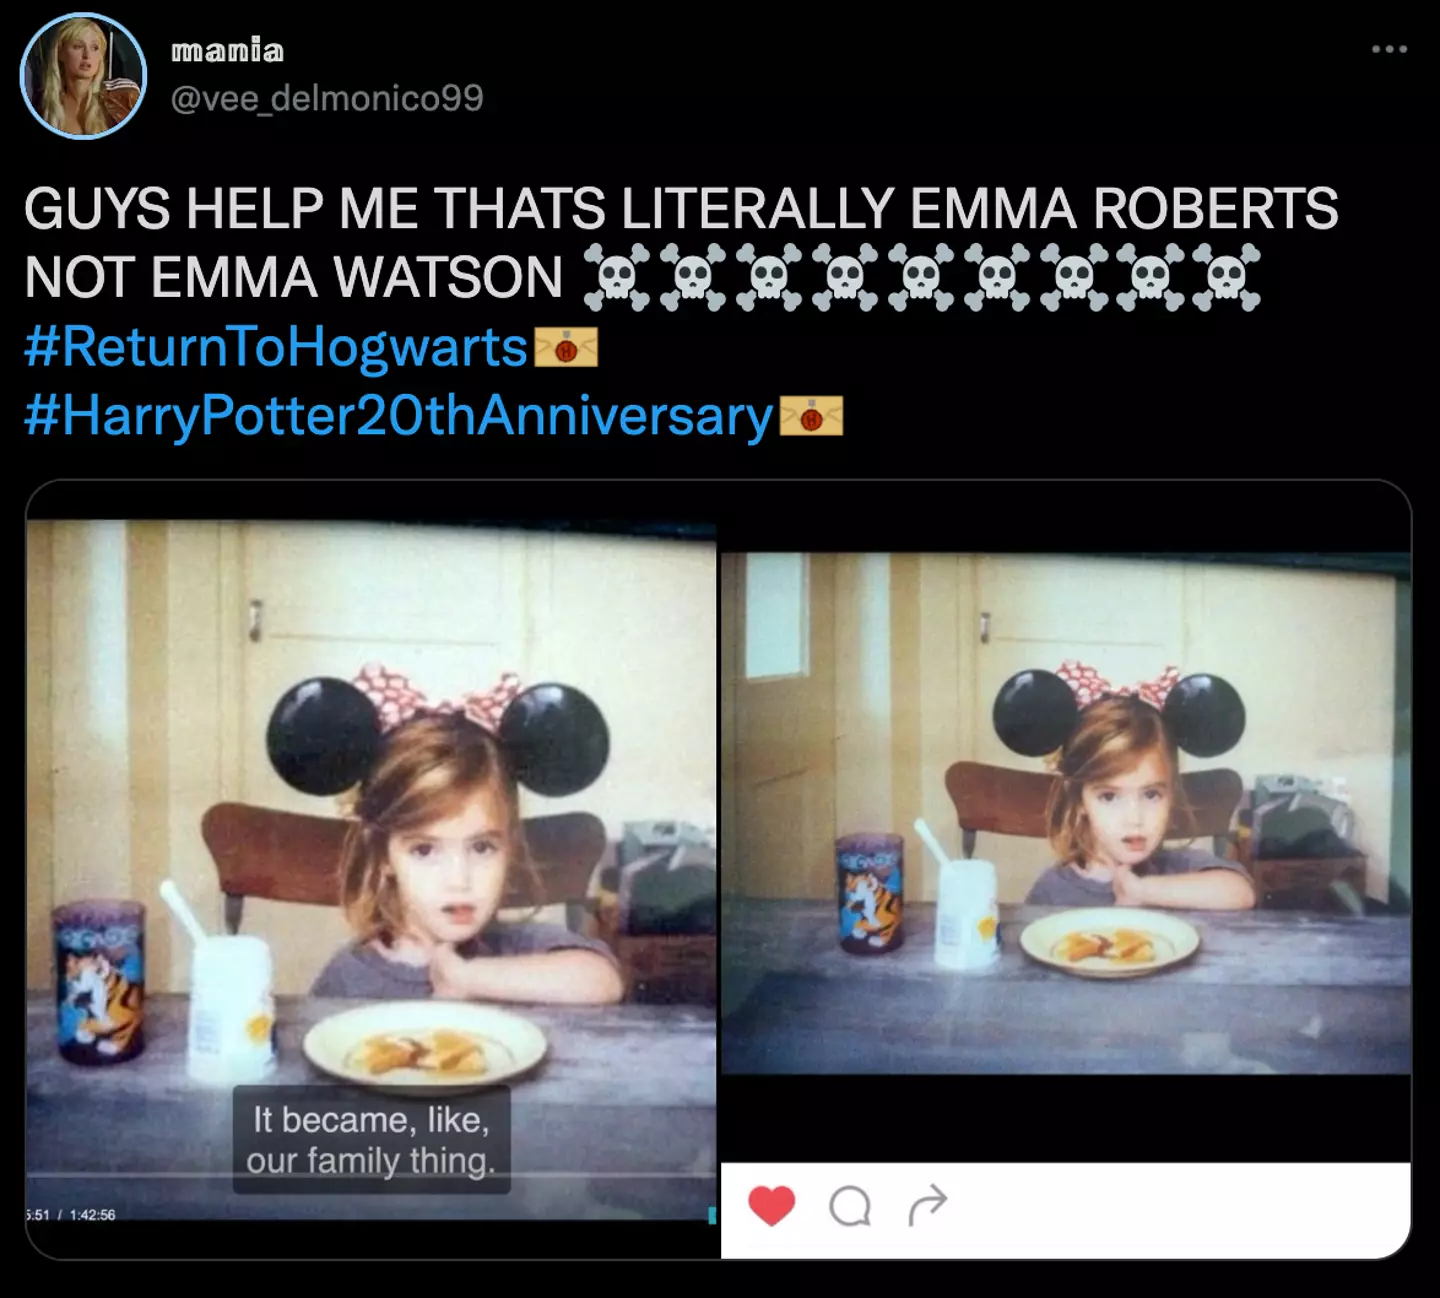 Fans noticed that a picture of a young Emma Roberts was used (